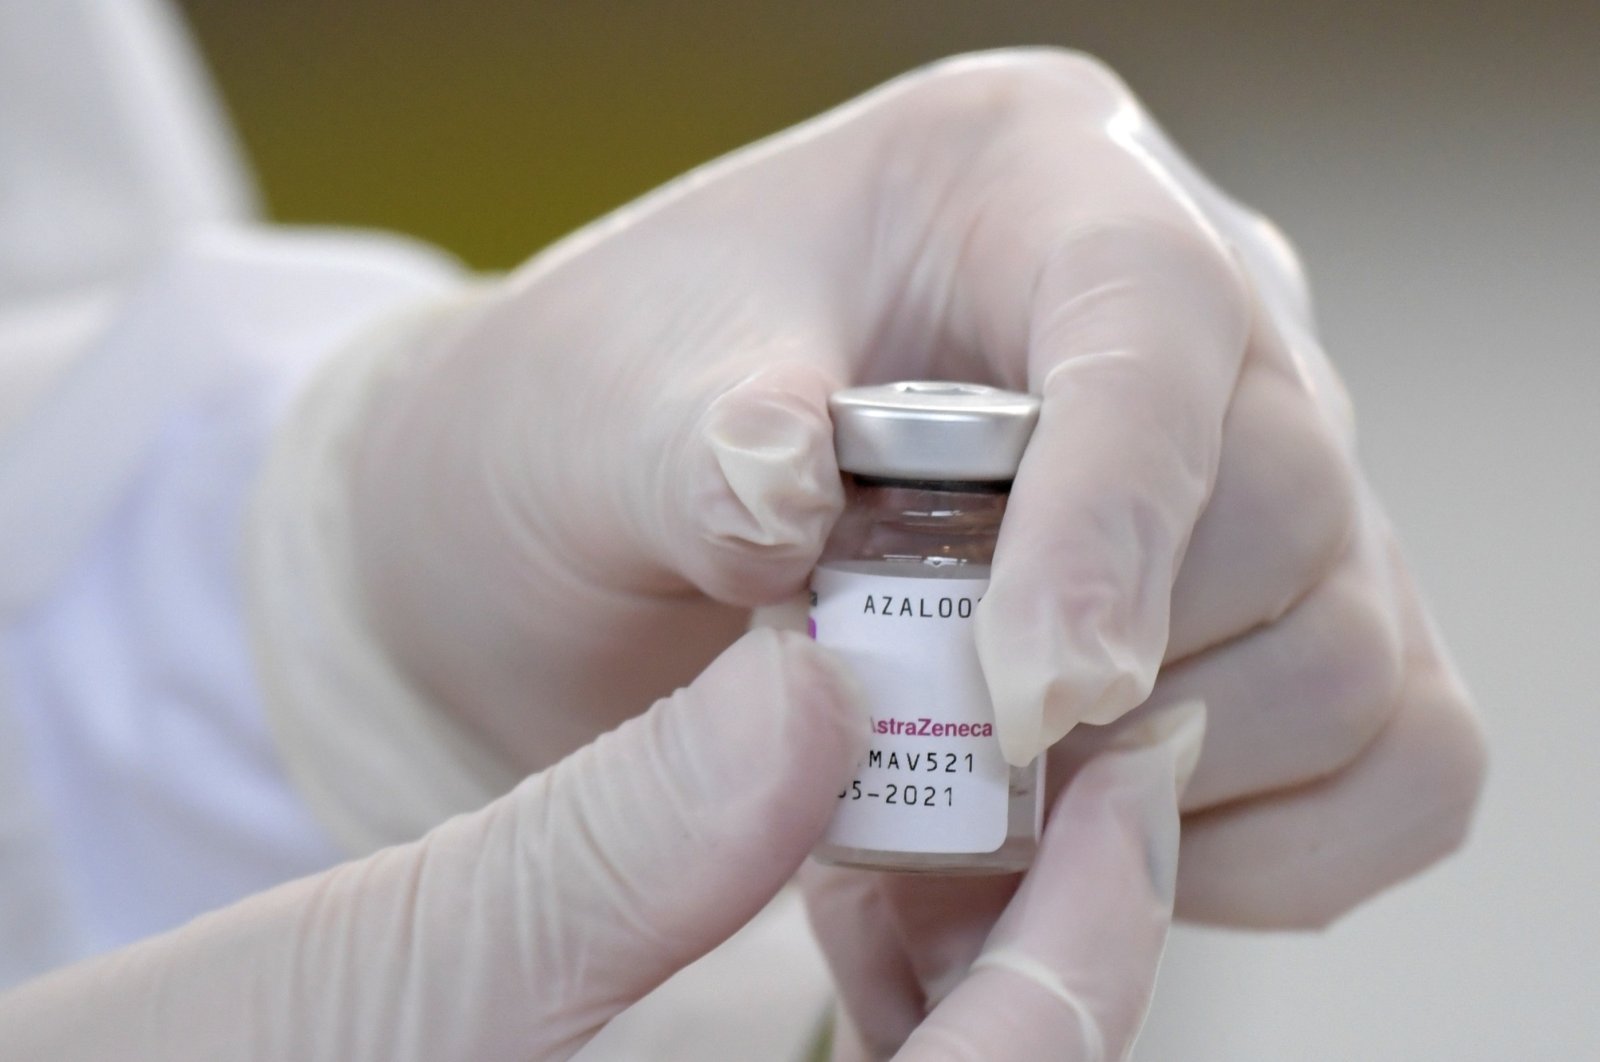 A health worker holds a vial of the Oxford/AstraZeneca vaccine against COVID-19, in Bogota, Colombia, April 5, 2021. (AFP Photo)